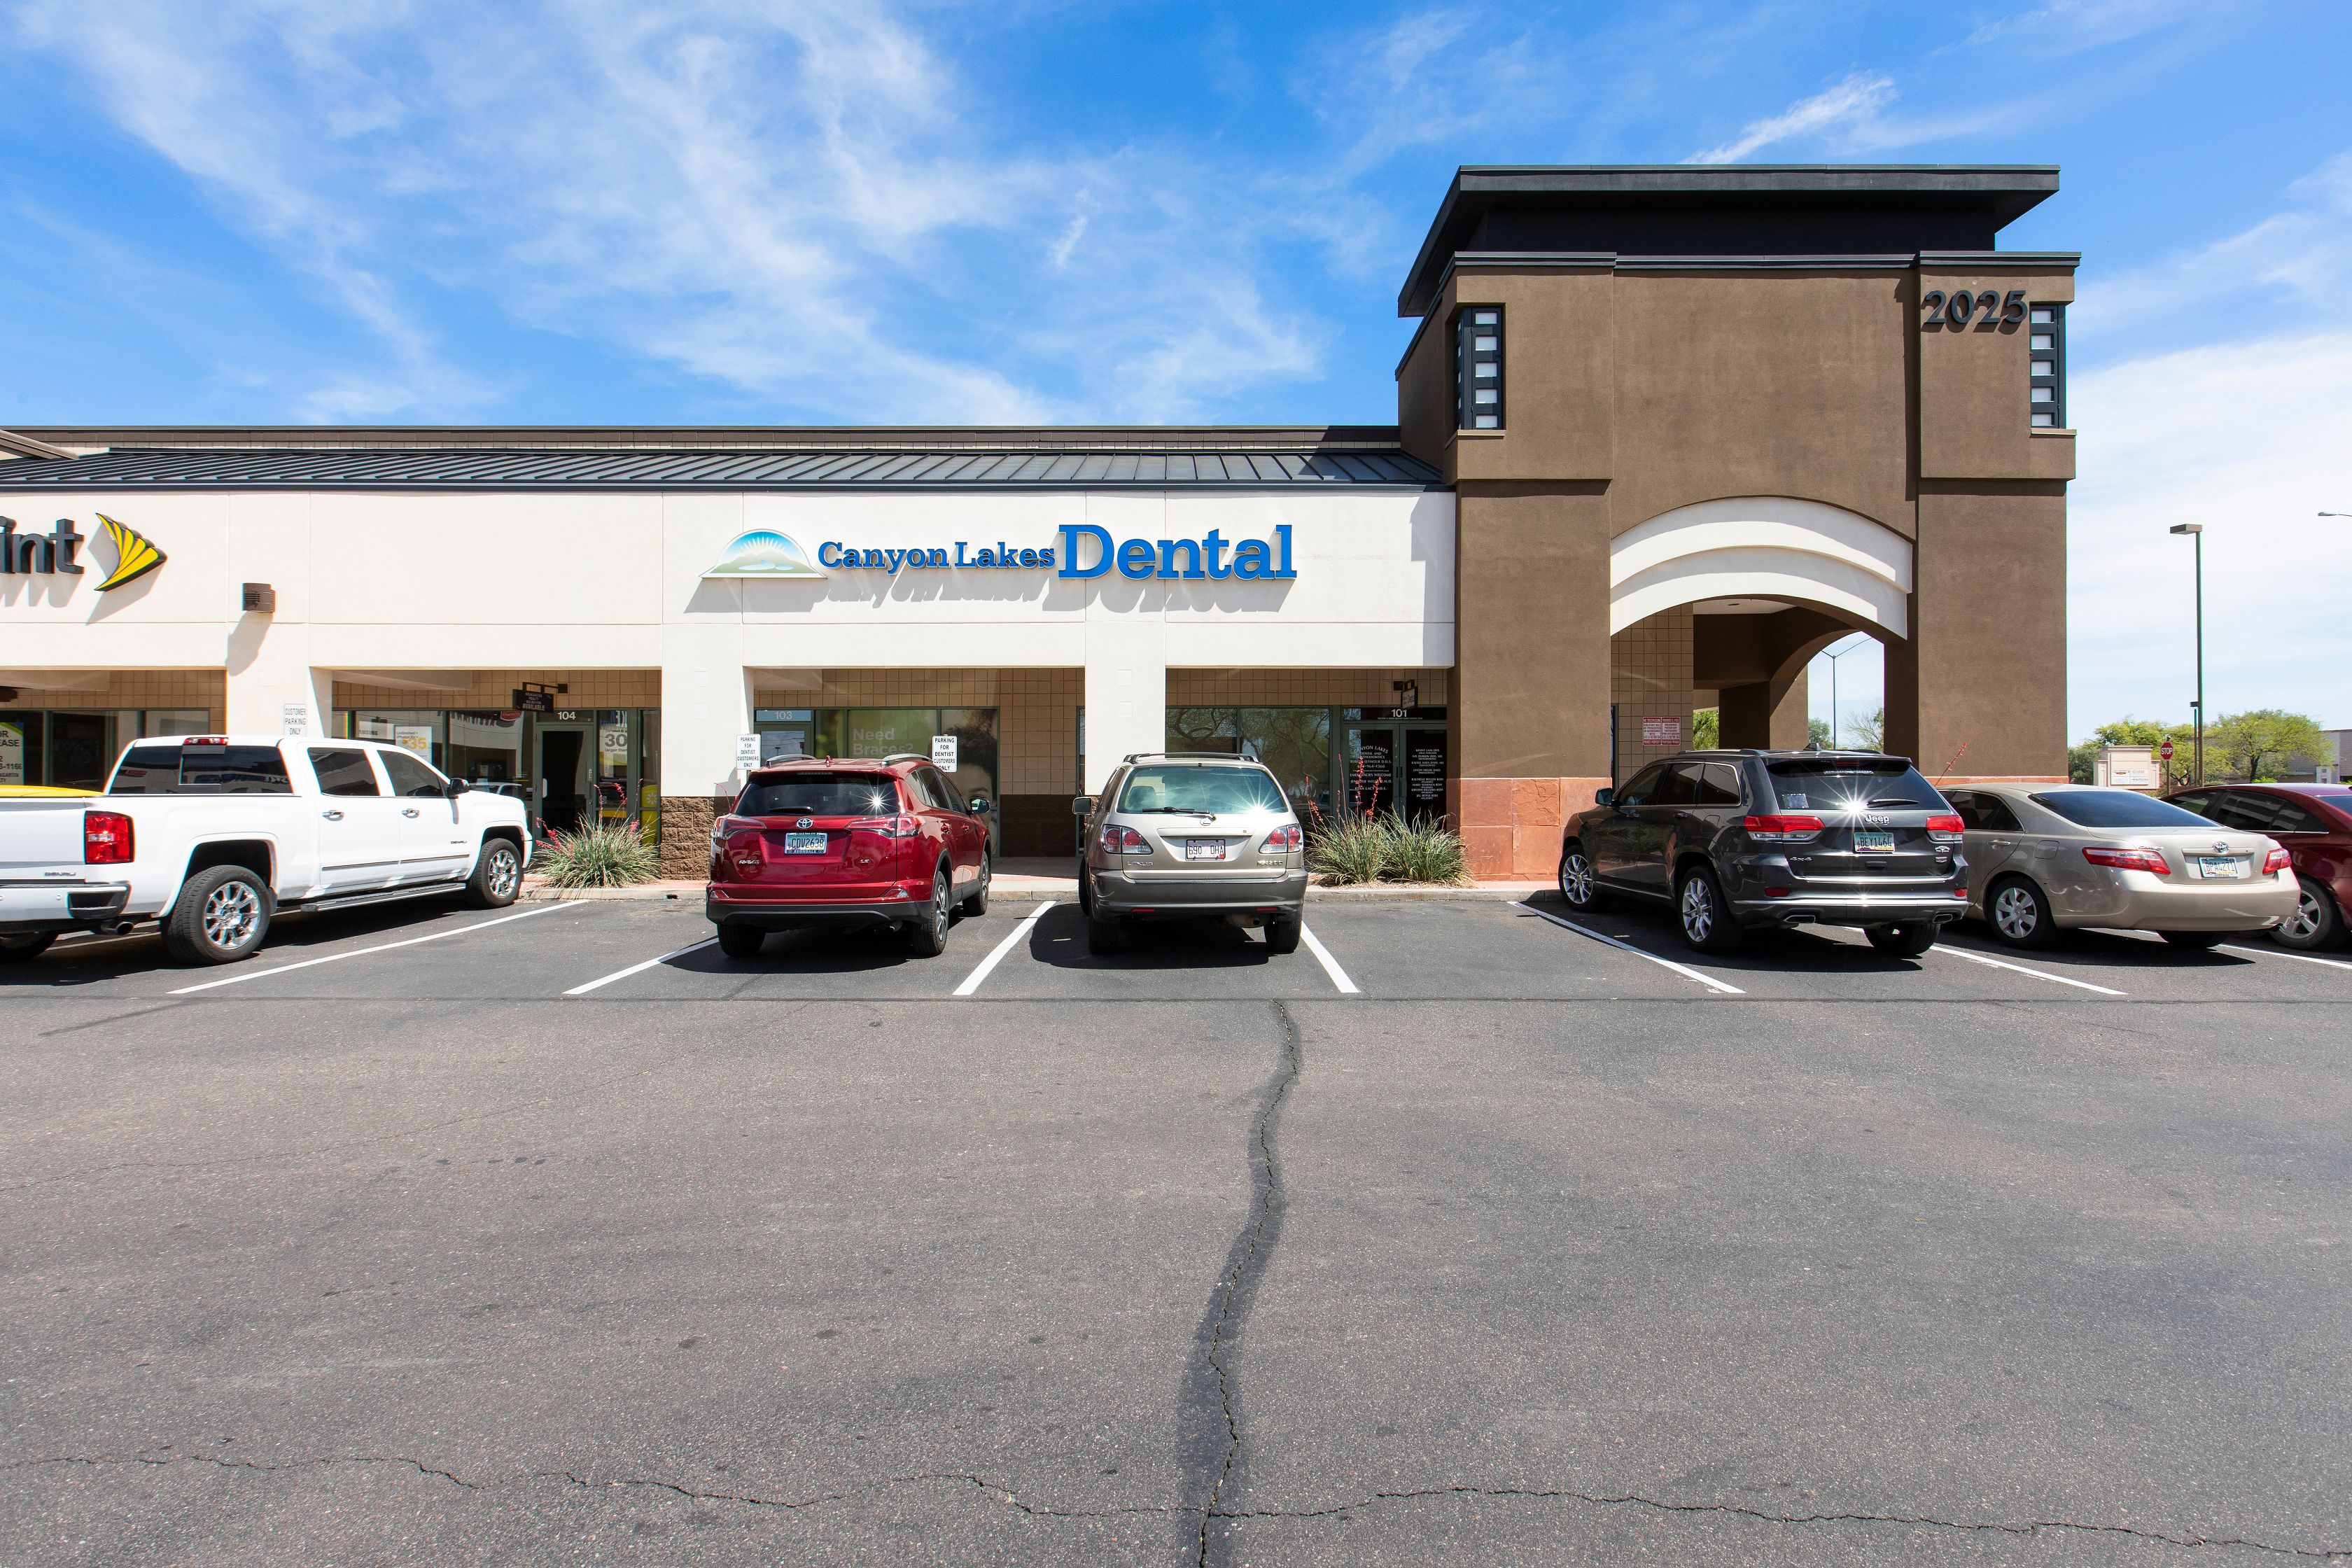 Looking for a family dentist in Mesa, AZ? You have come to the right spot!